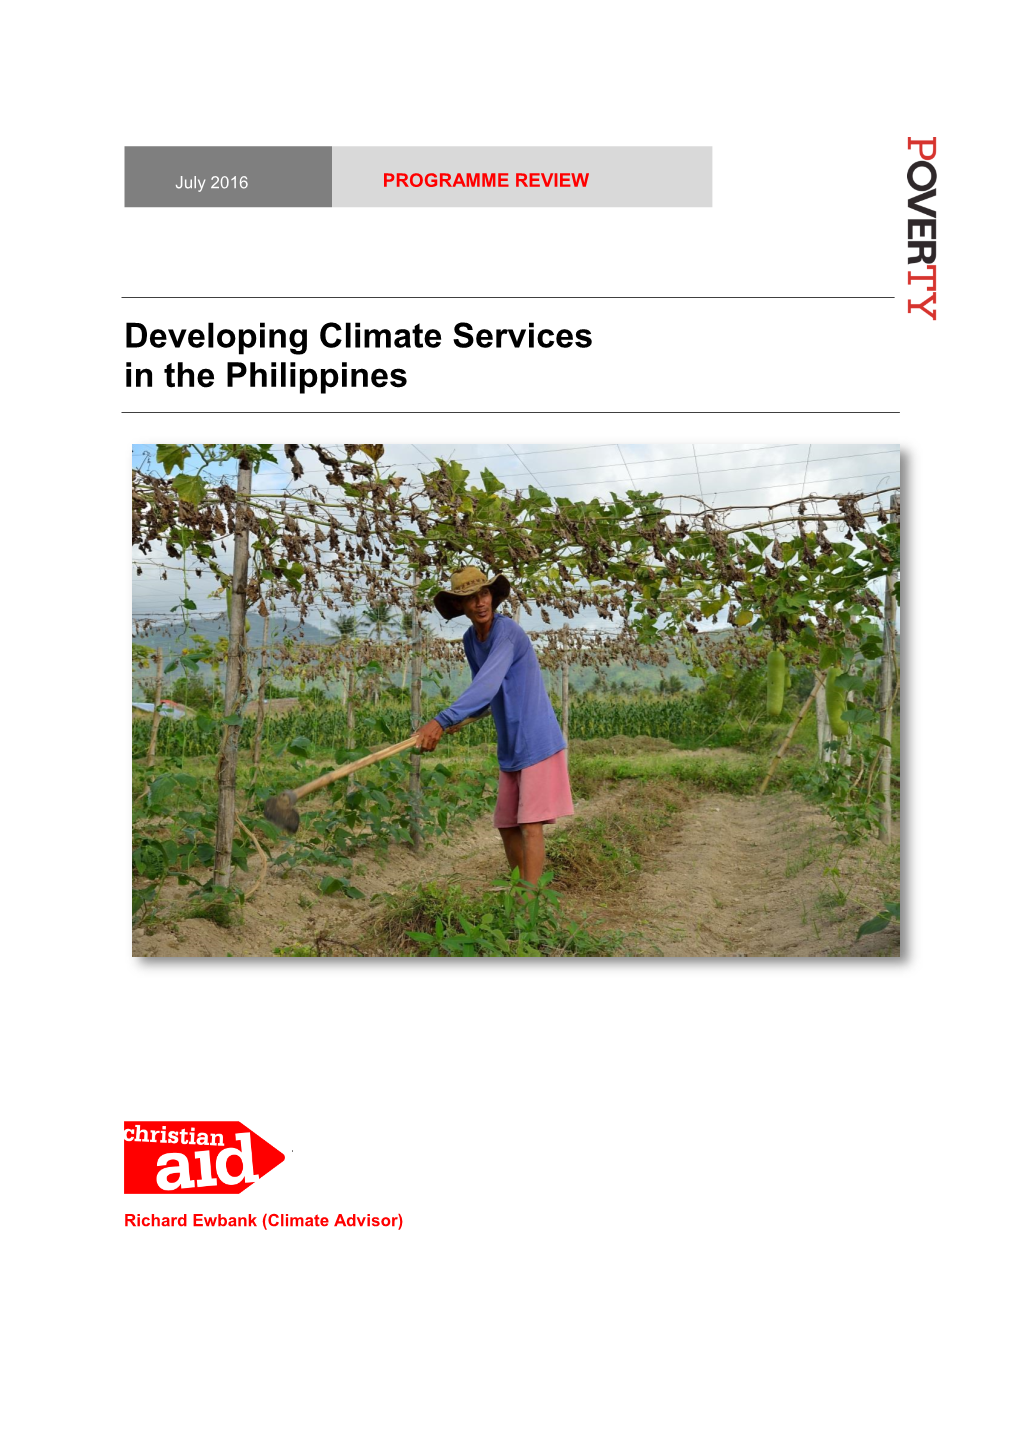 Developing Climate Services in the Philippines